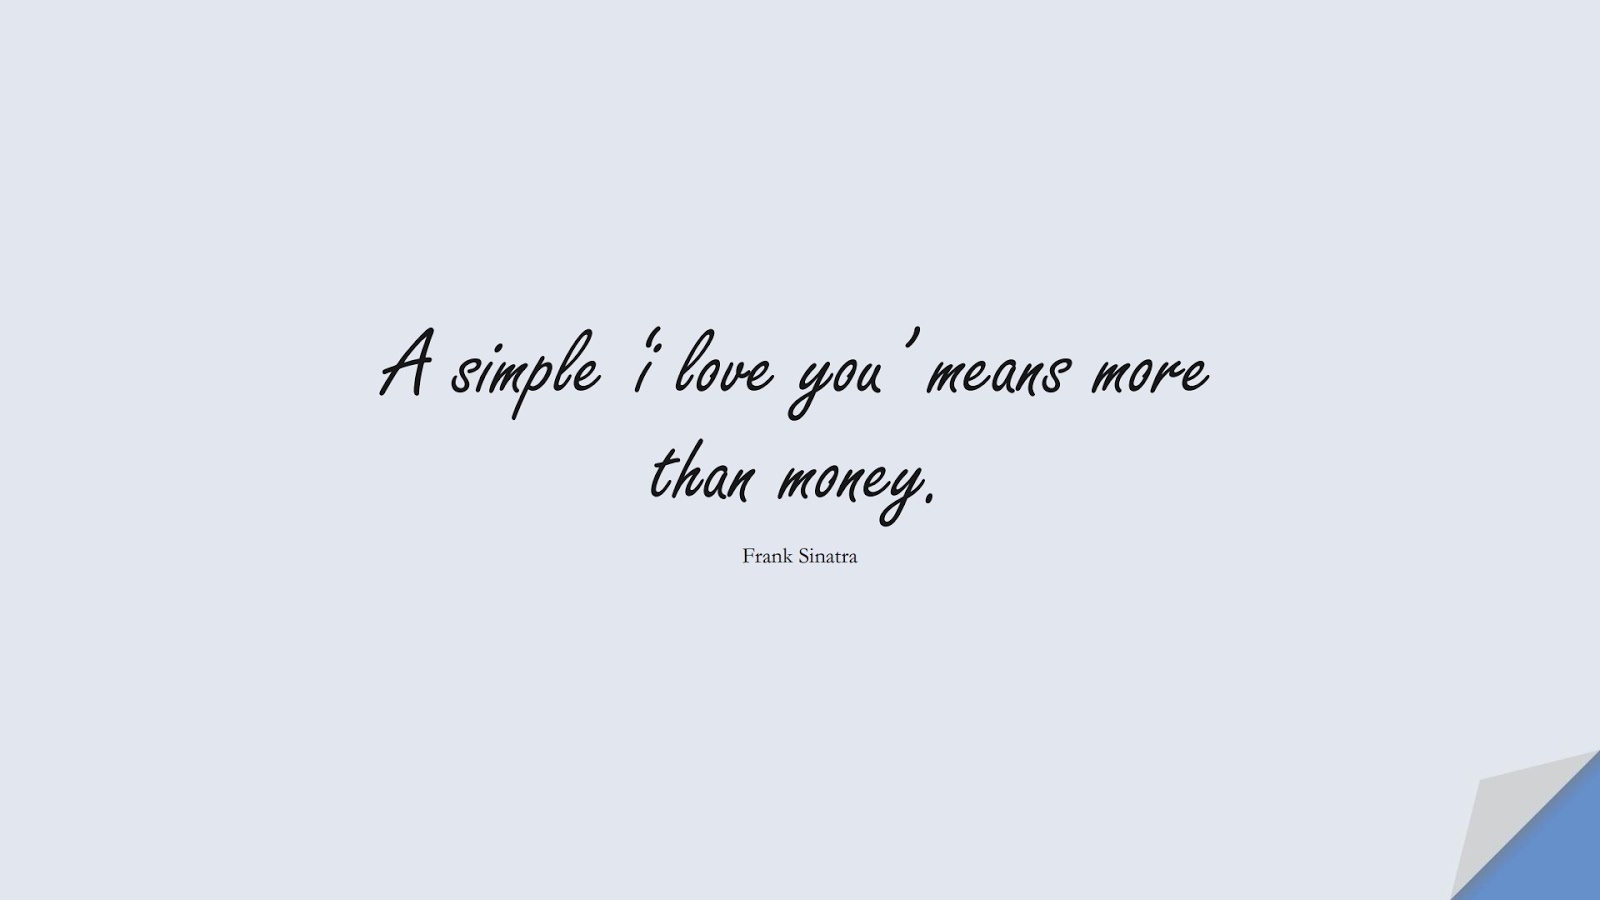 A simple ‘i love you’ means more than money. (Frank Sinatra);  #FamousQuotes